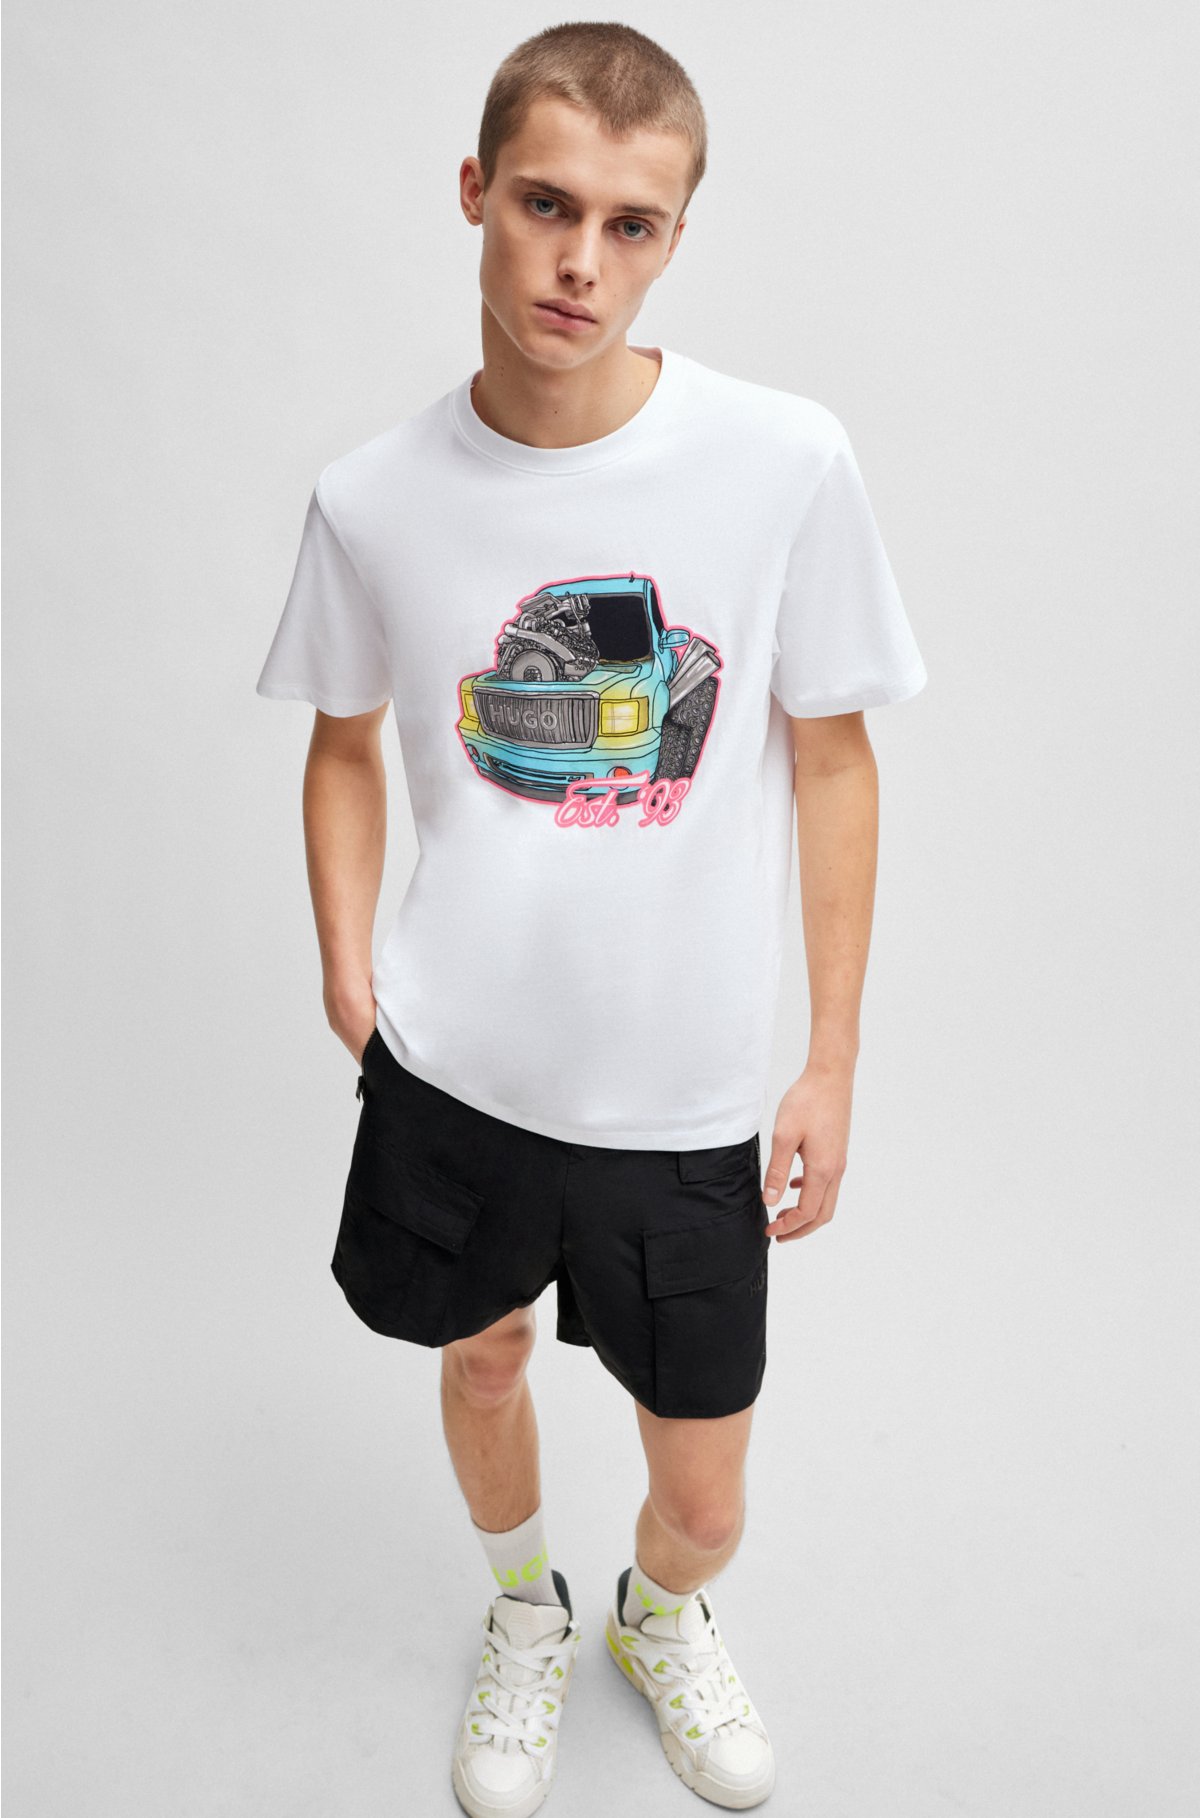 Relaxed-fit T-shirt in cotton with car artwork, White